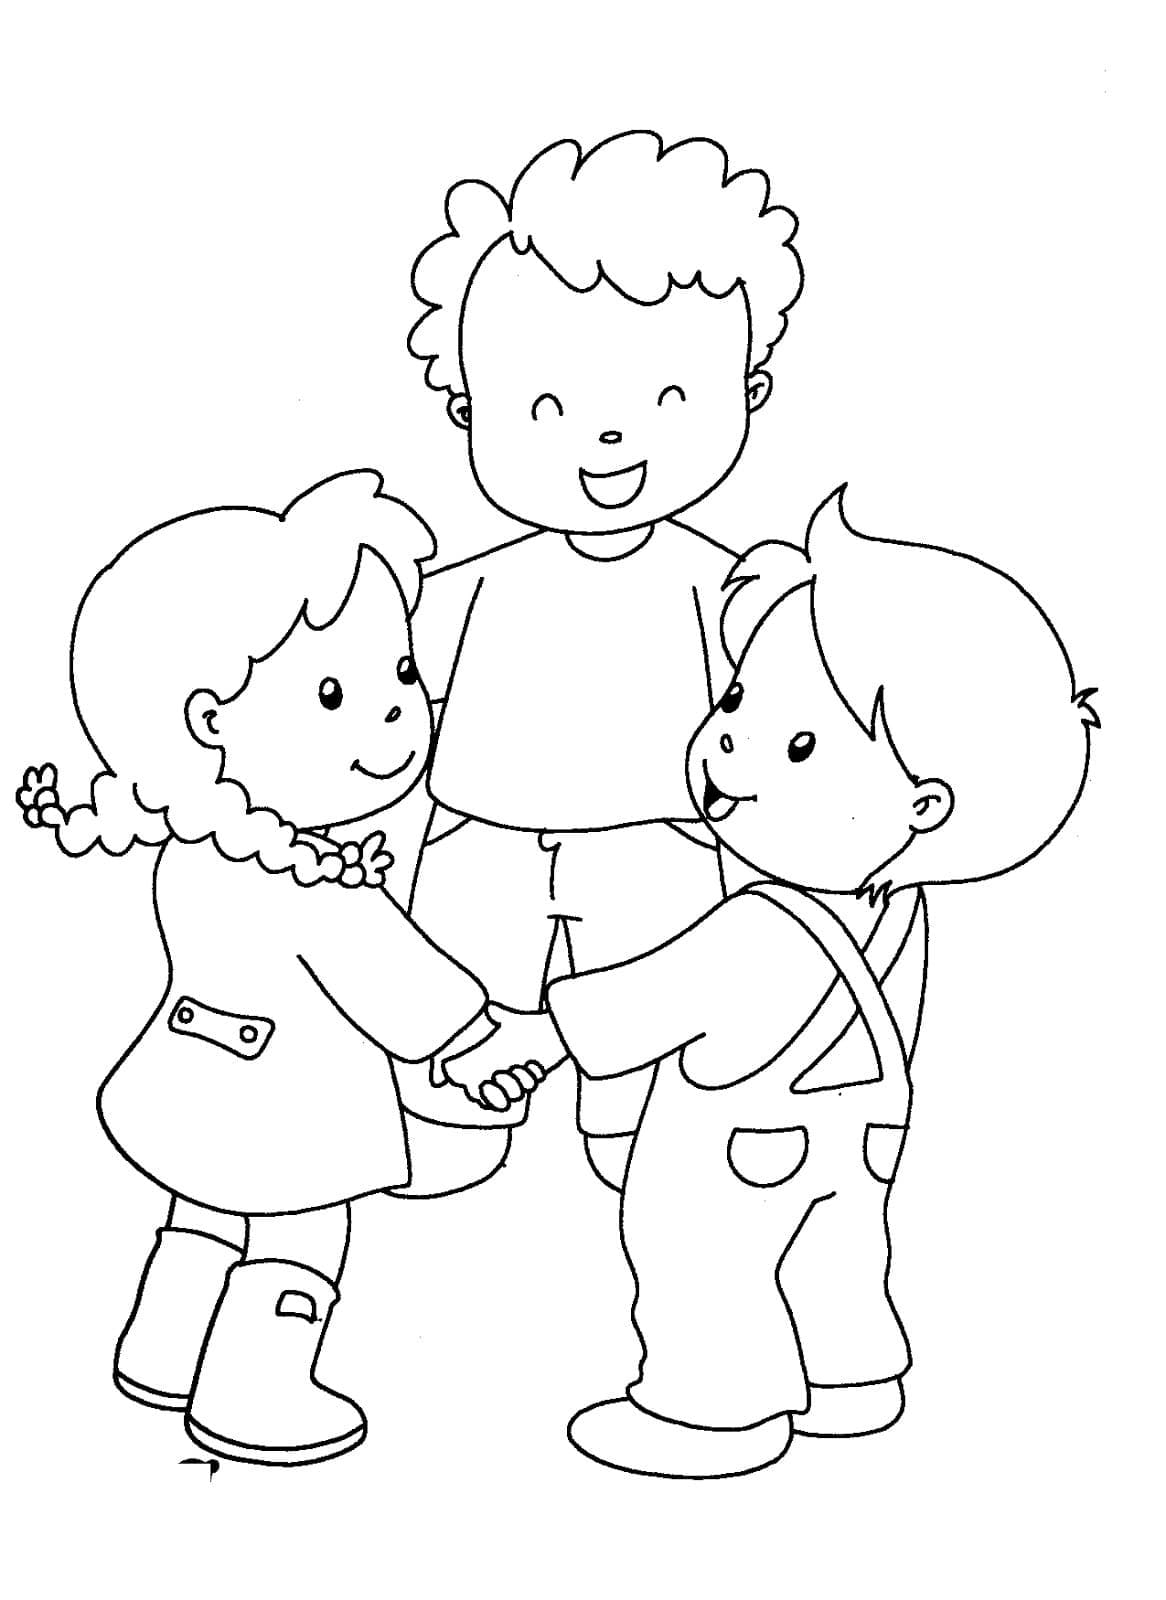 Trois Petits Amis coloring page